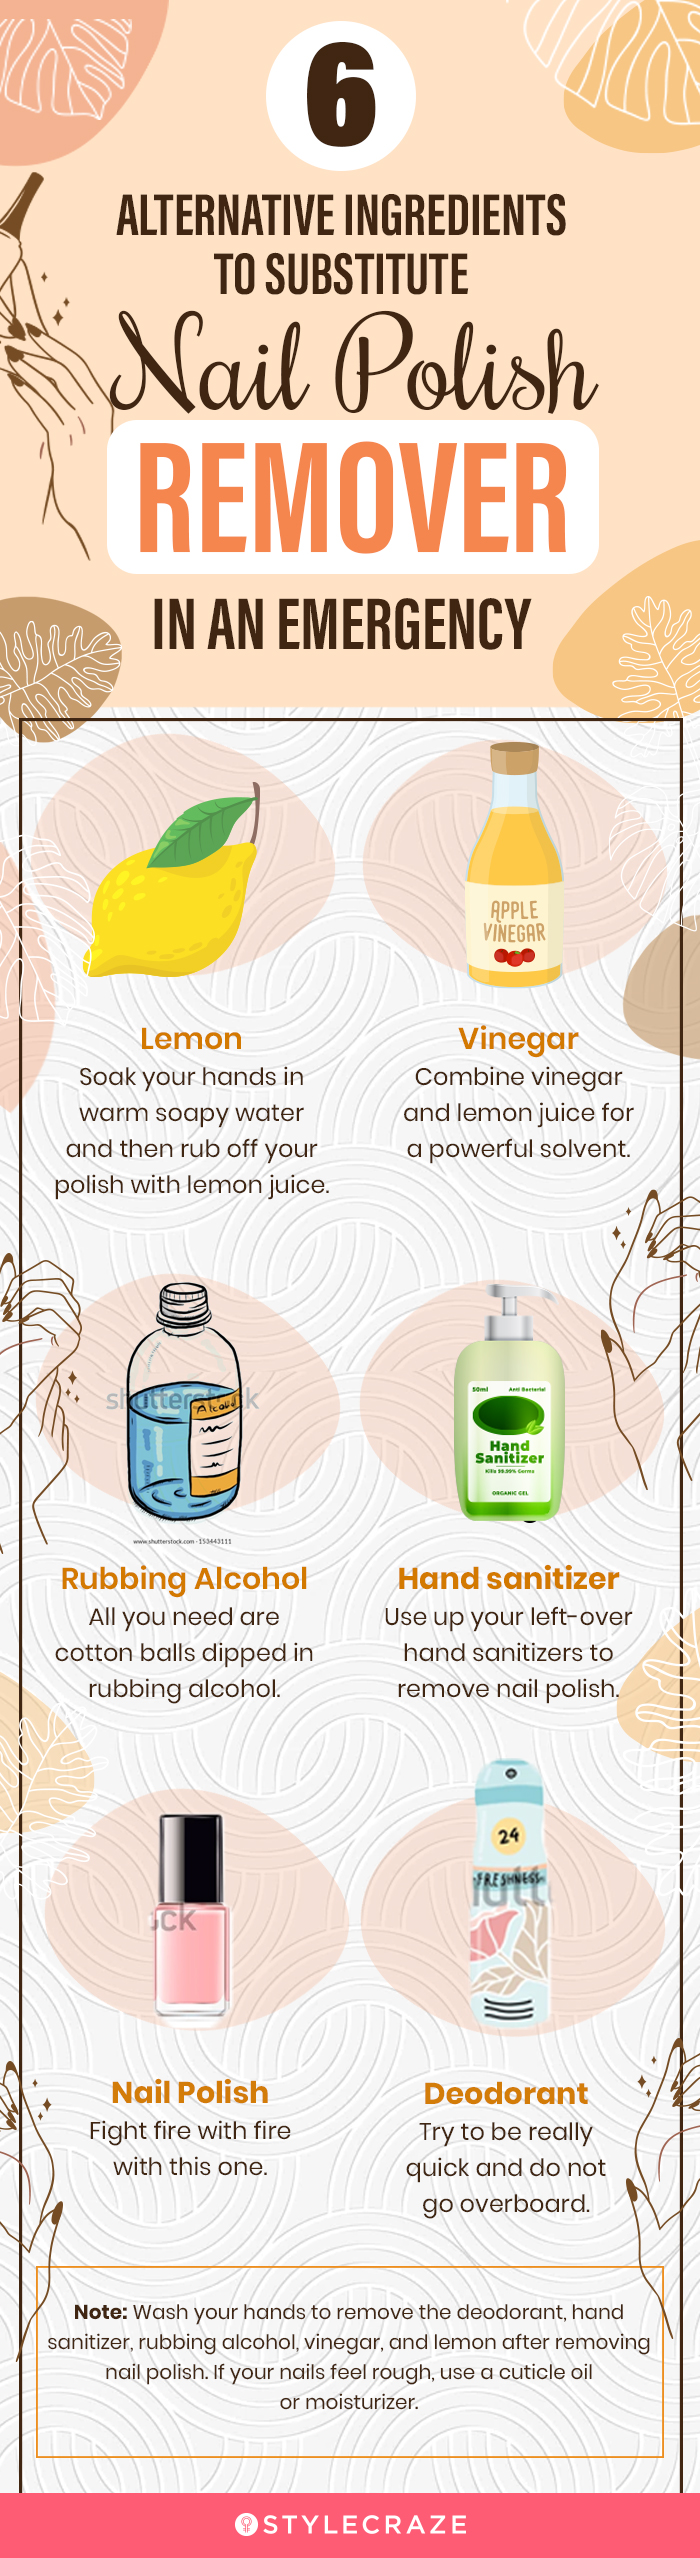 6 alternative ingredients to substitute nail polish remover in an emergency (infographic)